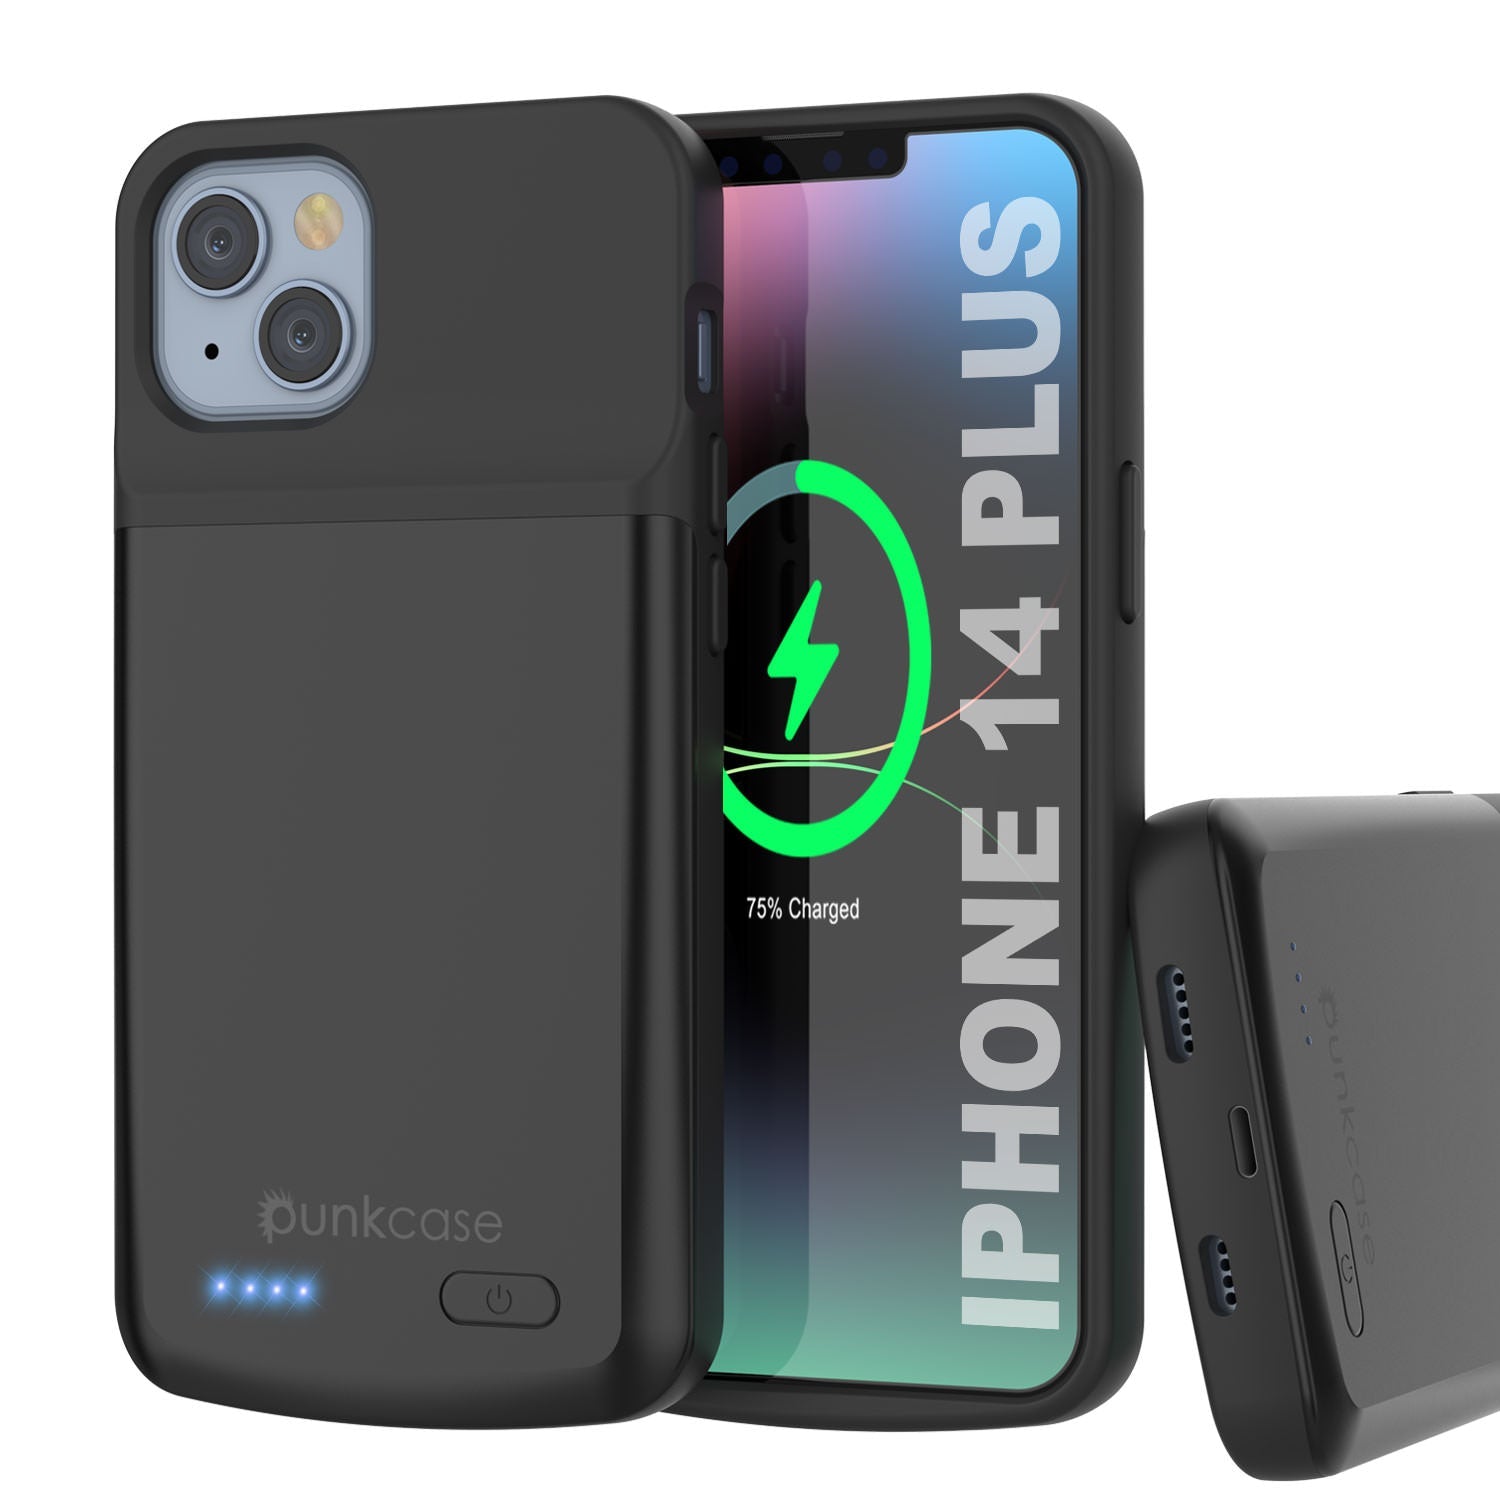 iPhone 14 Plus Battery Case, PunkJuice 4800mAH Fast Charging Power Bank W/ Screen Protector | [Black]